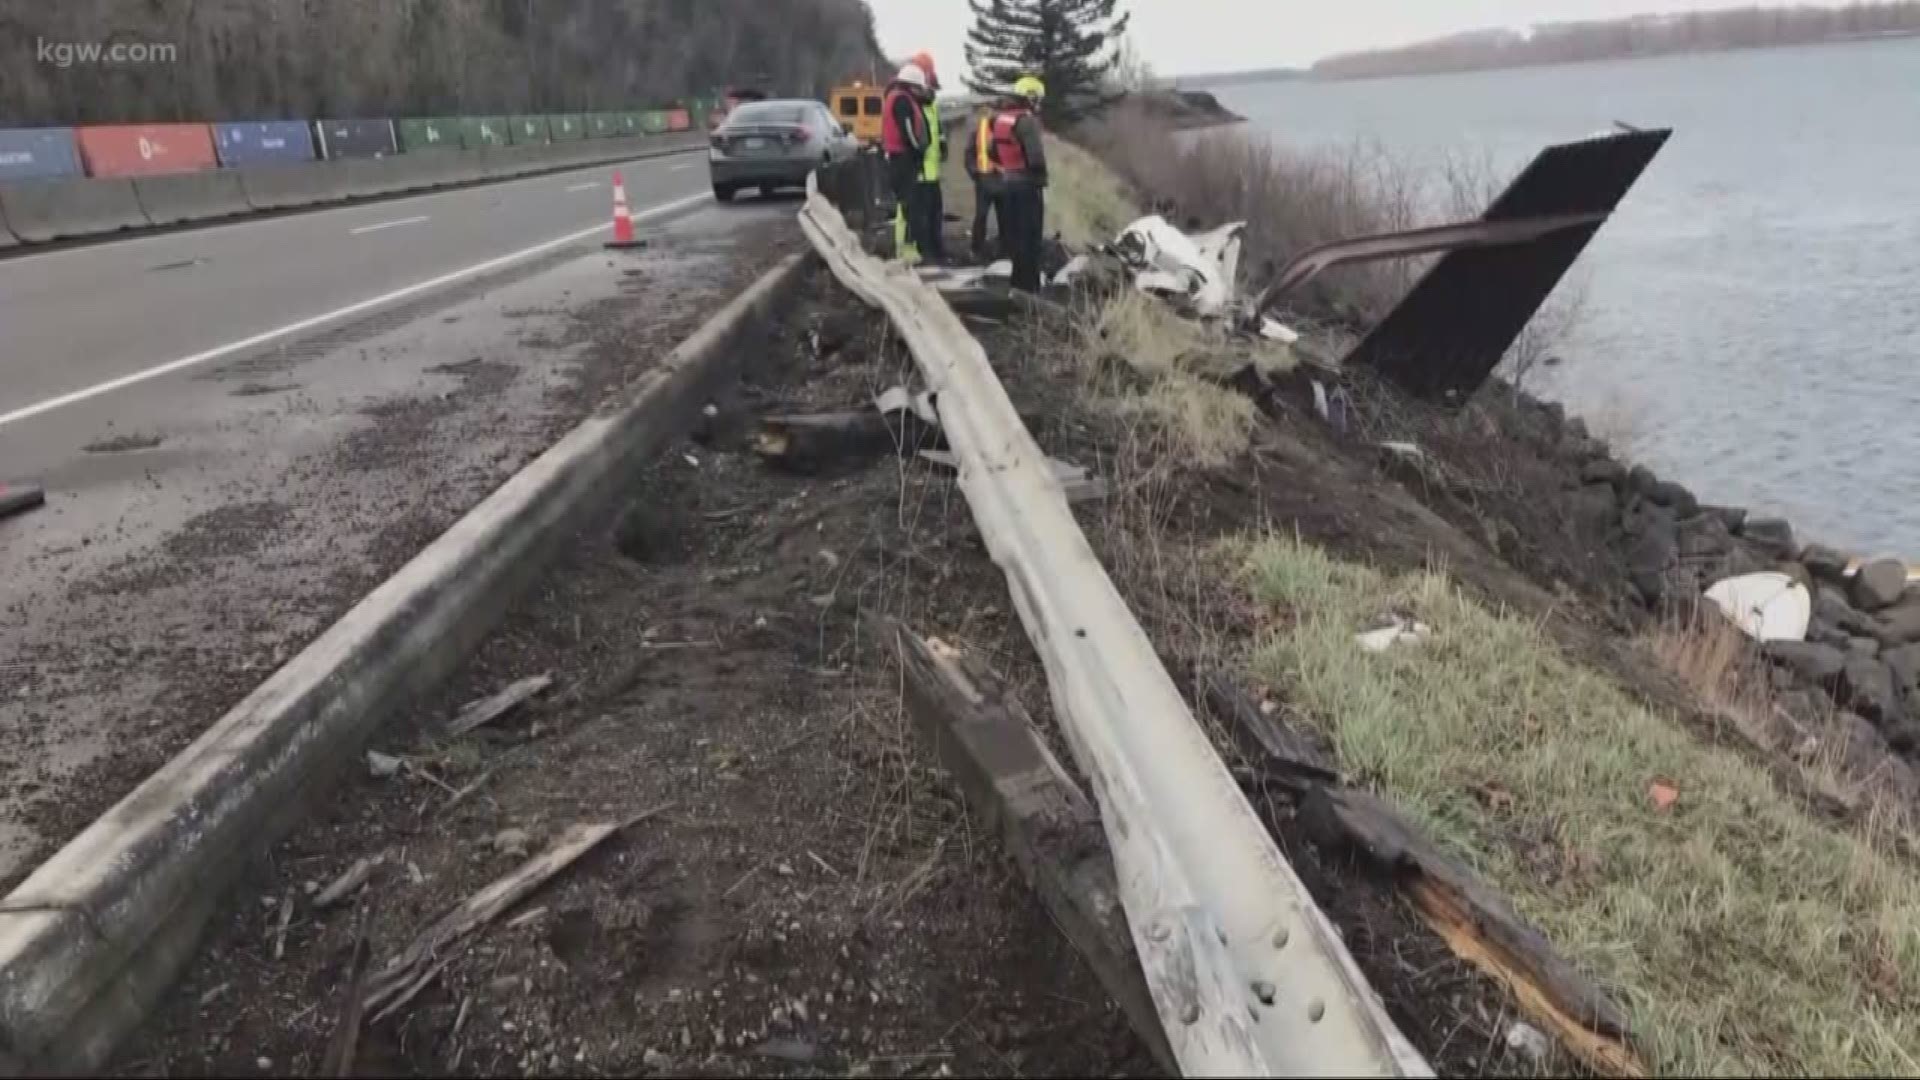 Meet the people who helped the injured truck driver after a crash into the Columbia River.